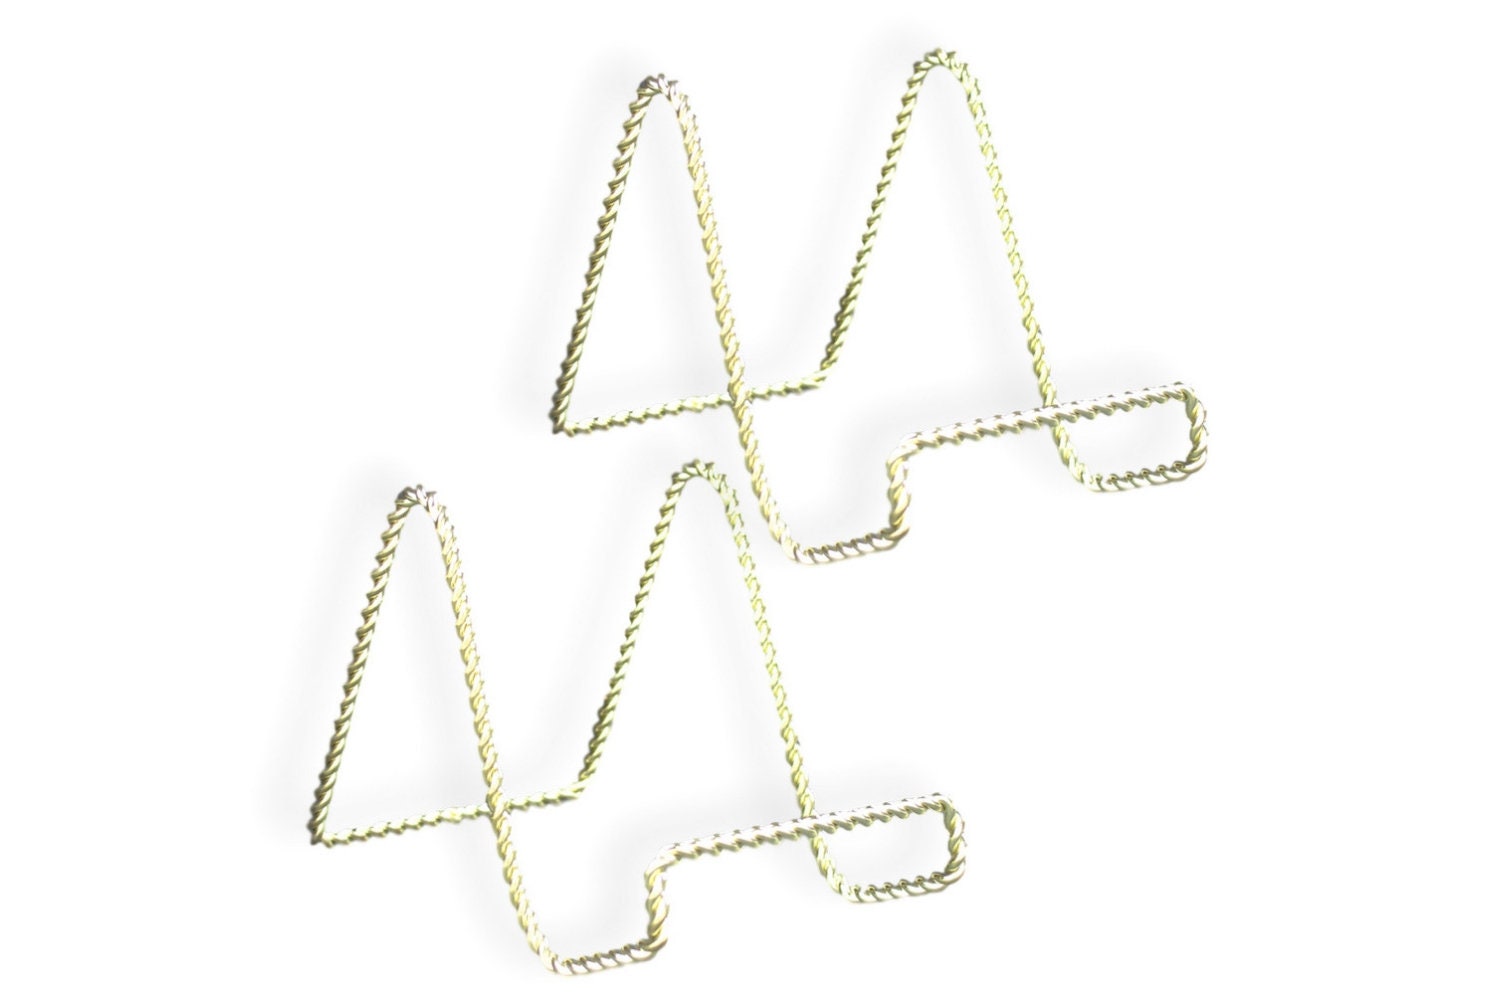 BANBERRY Designs Wire Easel Display Stand - Twisted Brass Metal - 6 inch - Pack of 2